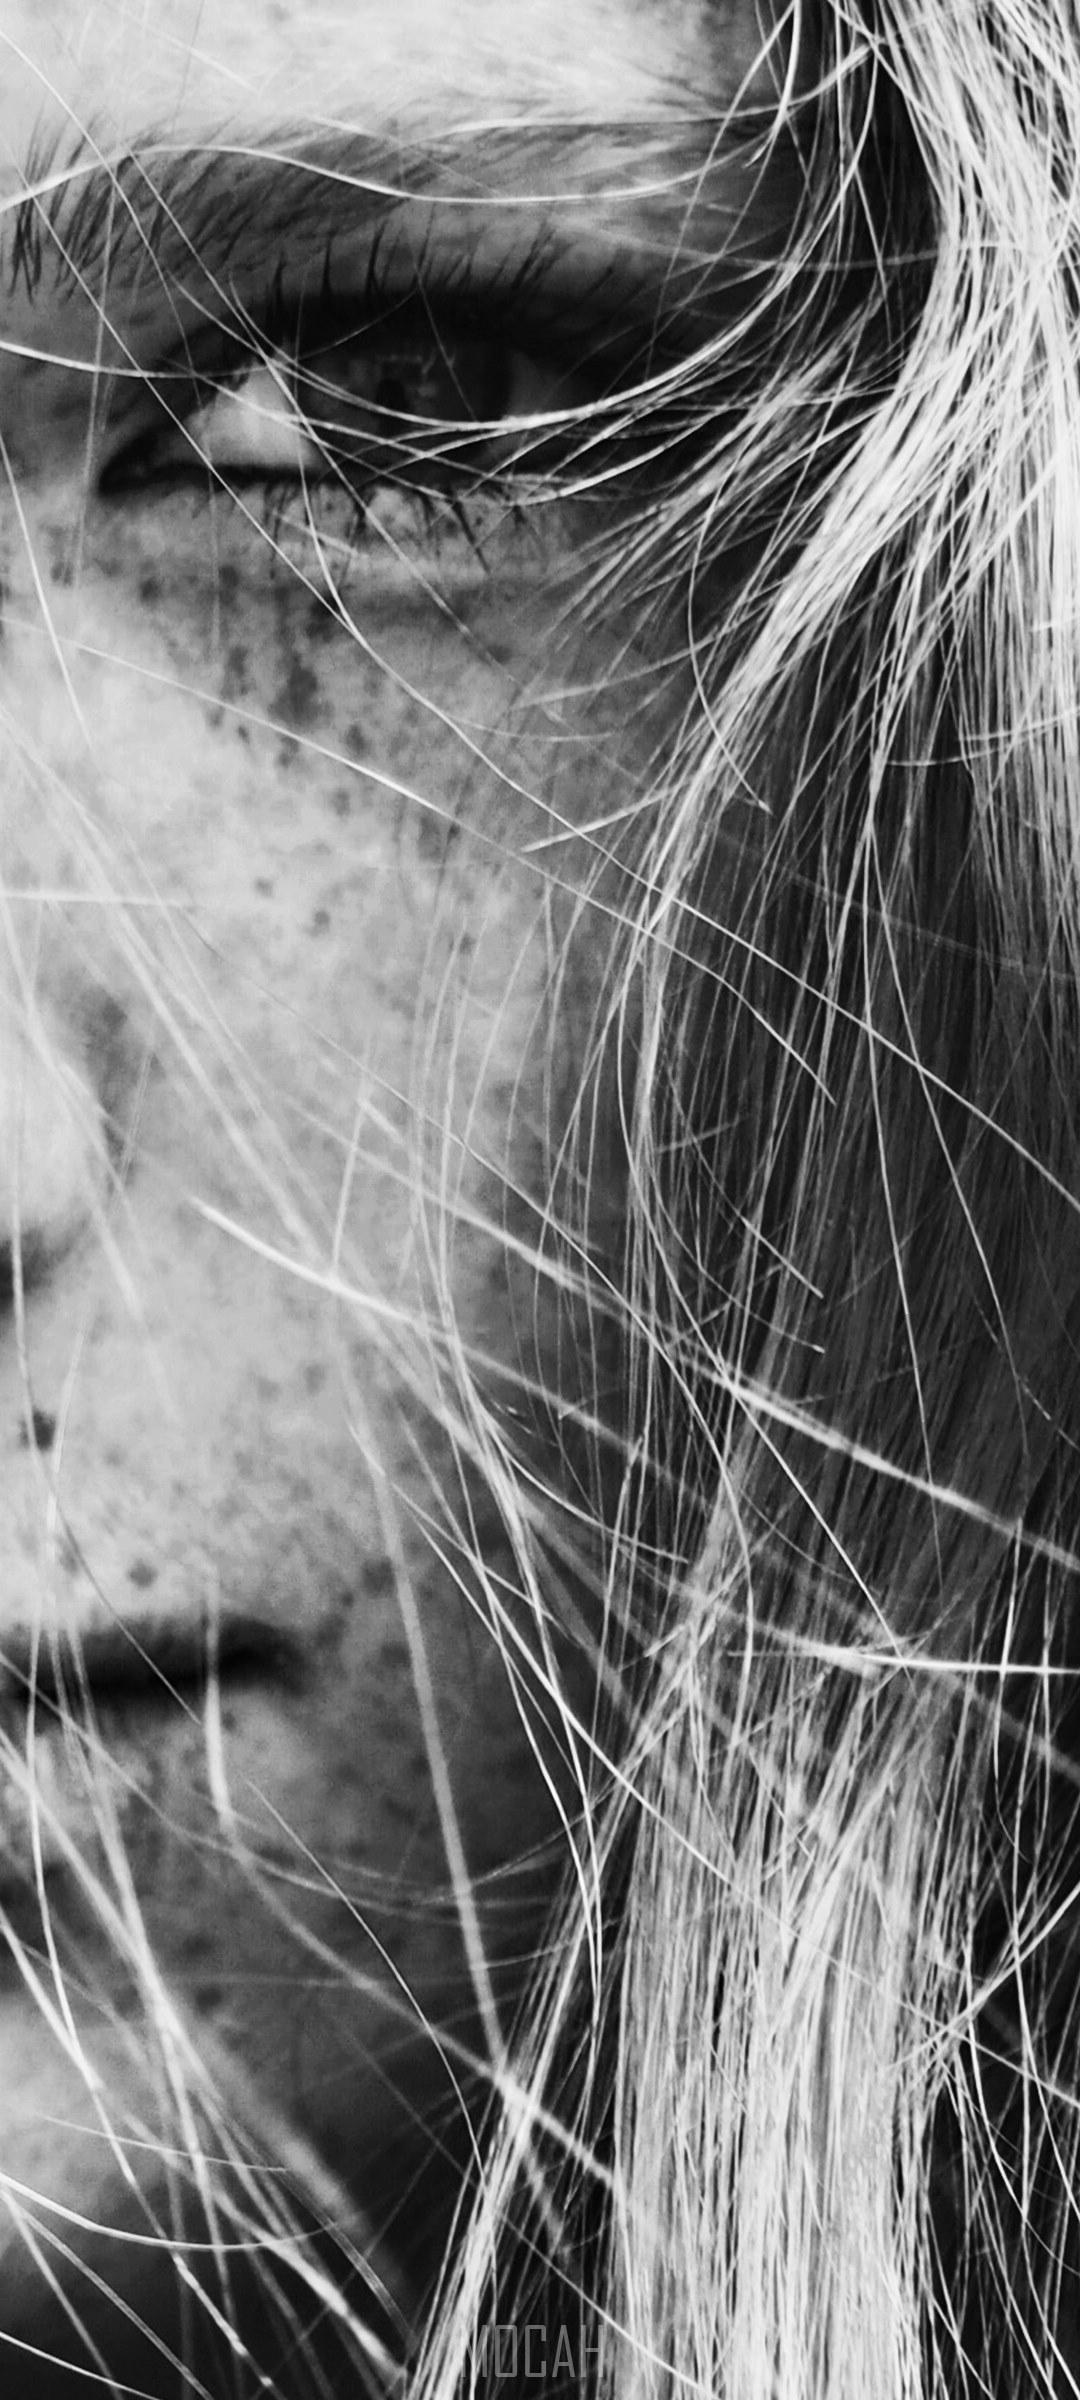 HD wallpaper, Freckles On Dutch Girl Face, Oppo F17 Pro Wallpaper 1080P, 1080X2400, Black And White Close Up Shot Of Young Female Face With Freckles In Amsterdam